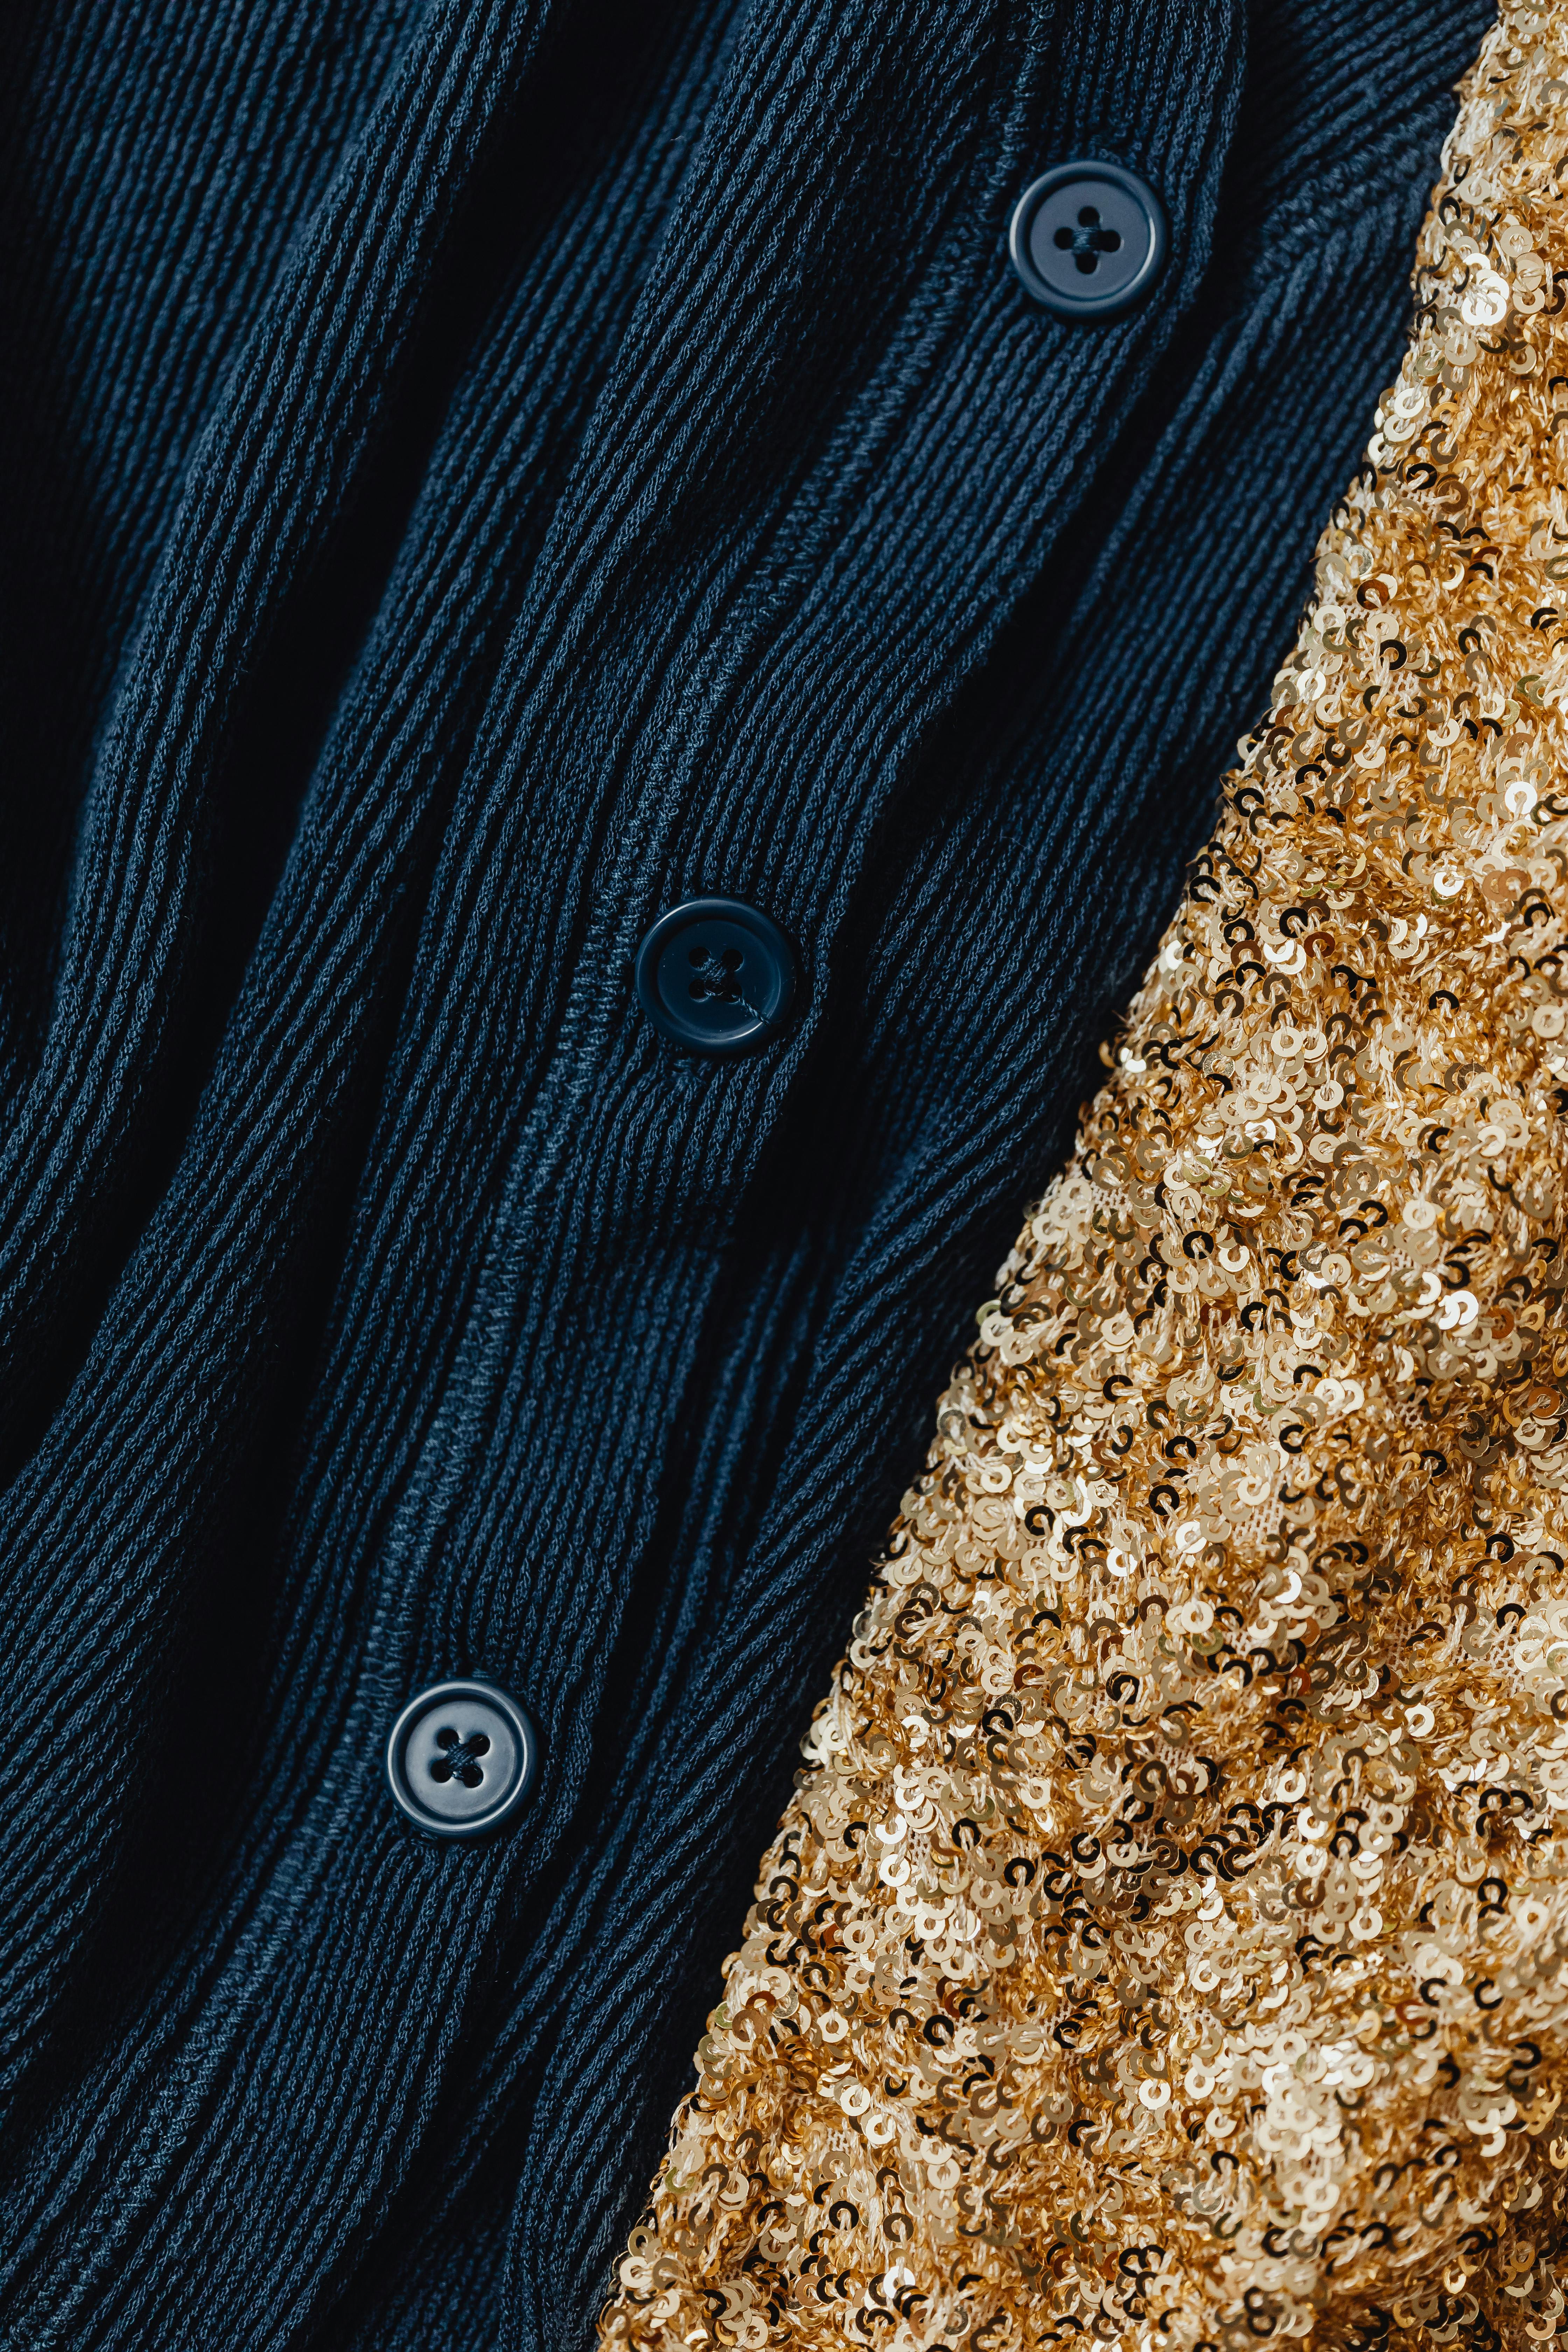 close up shot of a dark blue knitwear and gold sequins